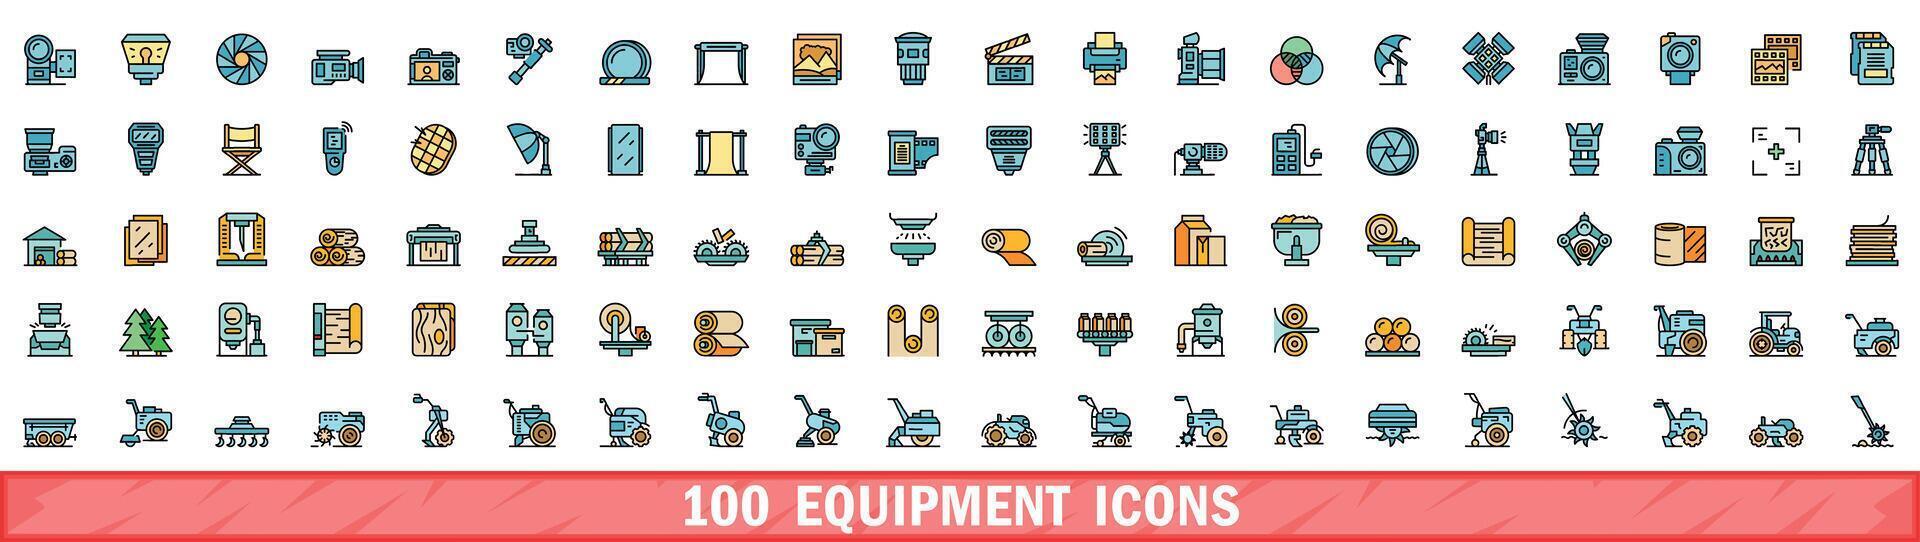 100 equipment icons set, color line style vector